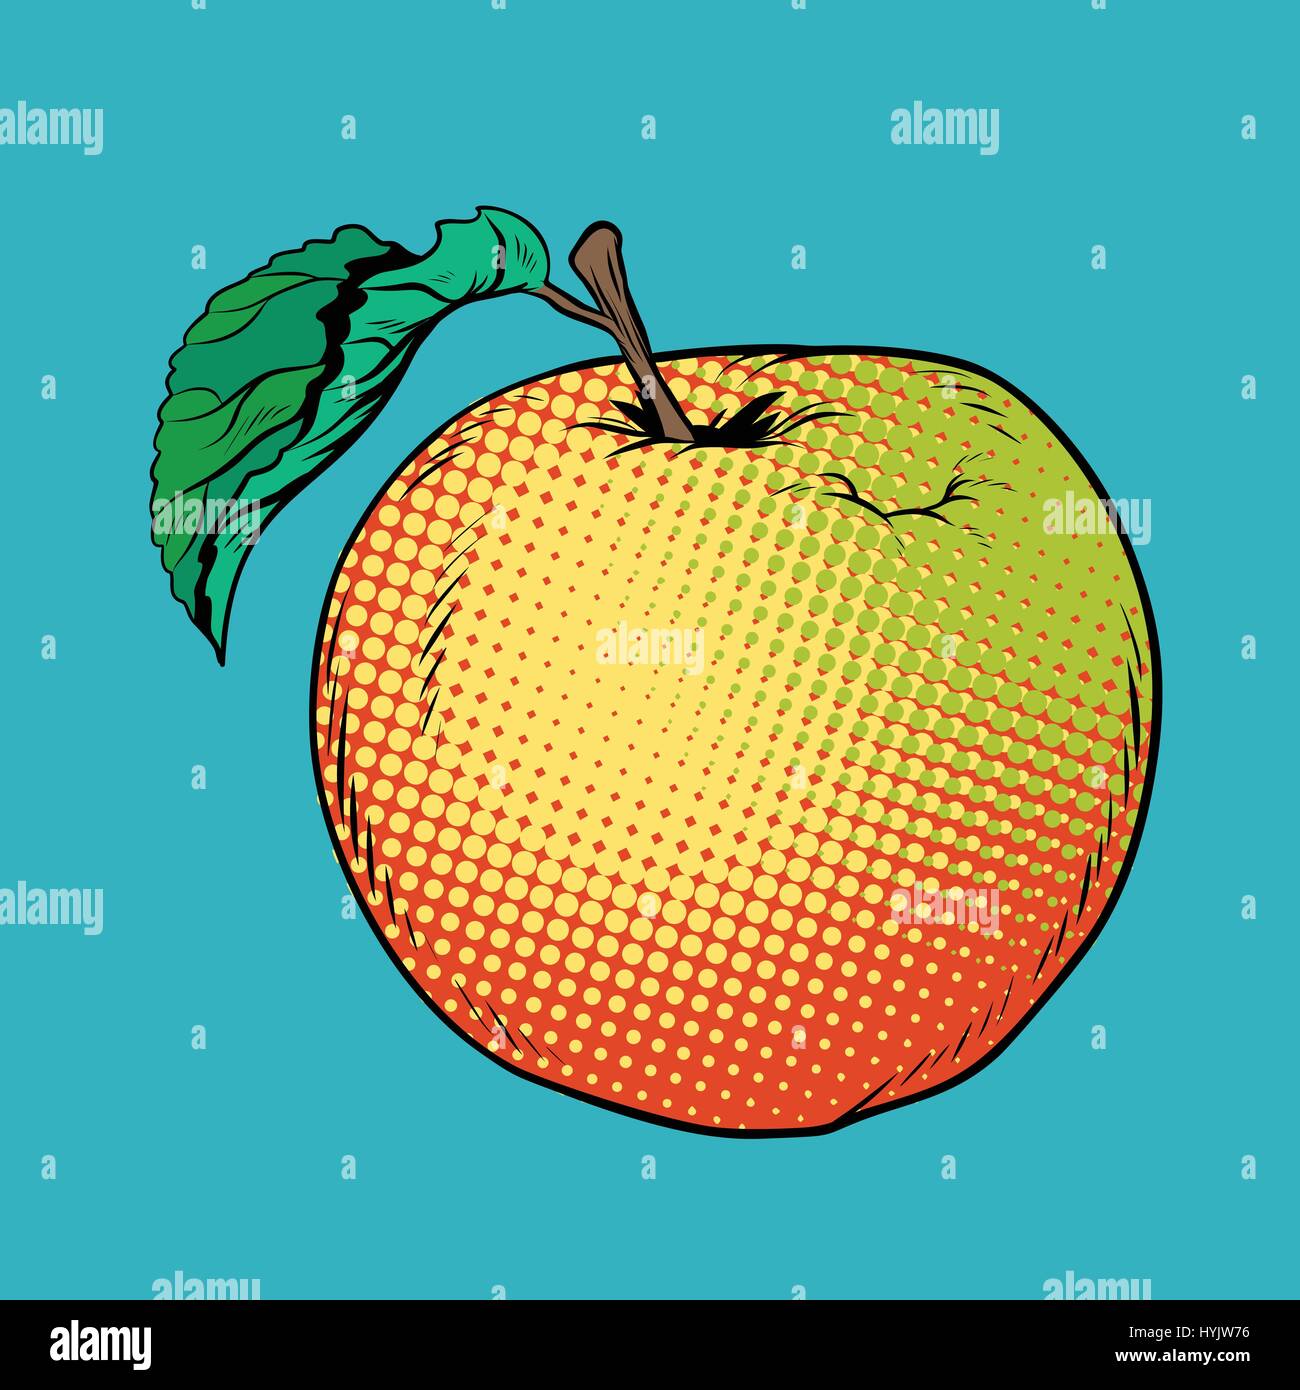 Ripe yellow red Apple with green leaf Stock Vector